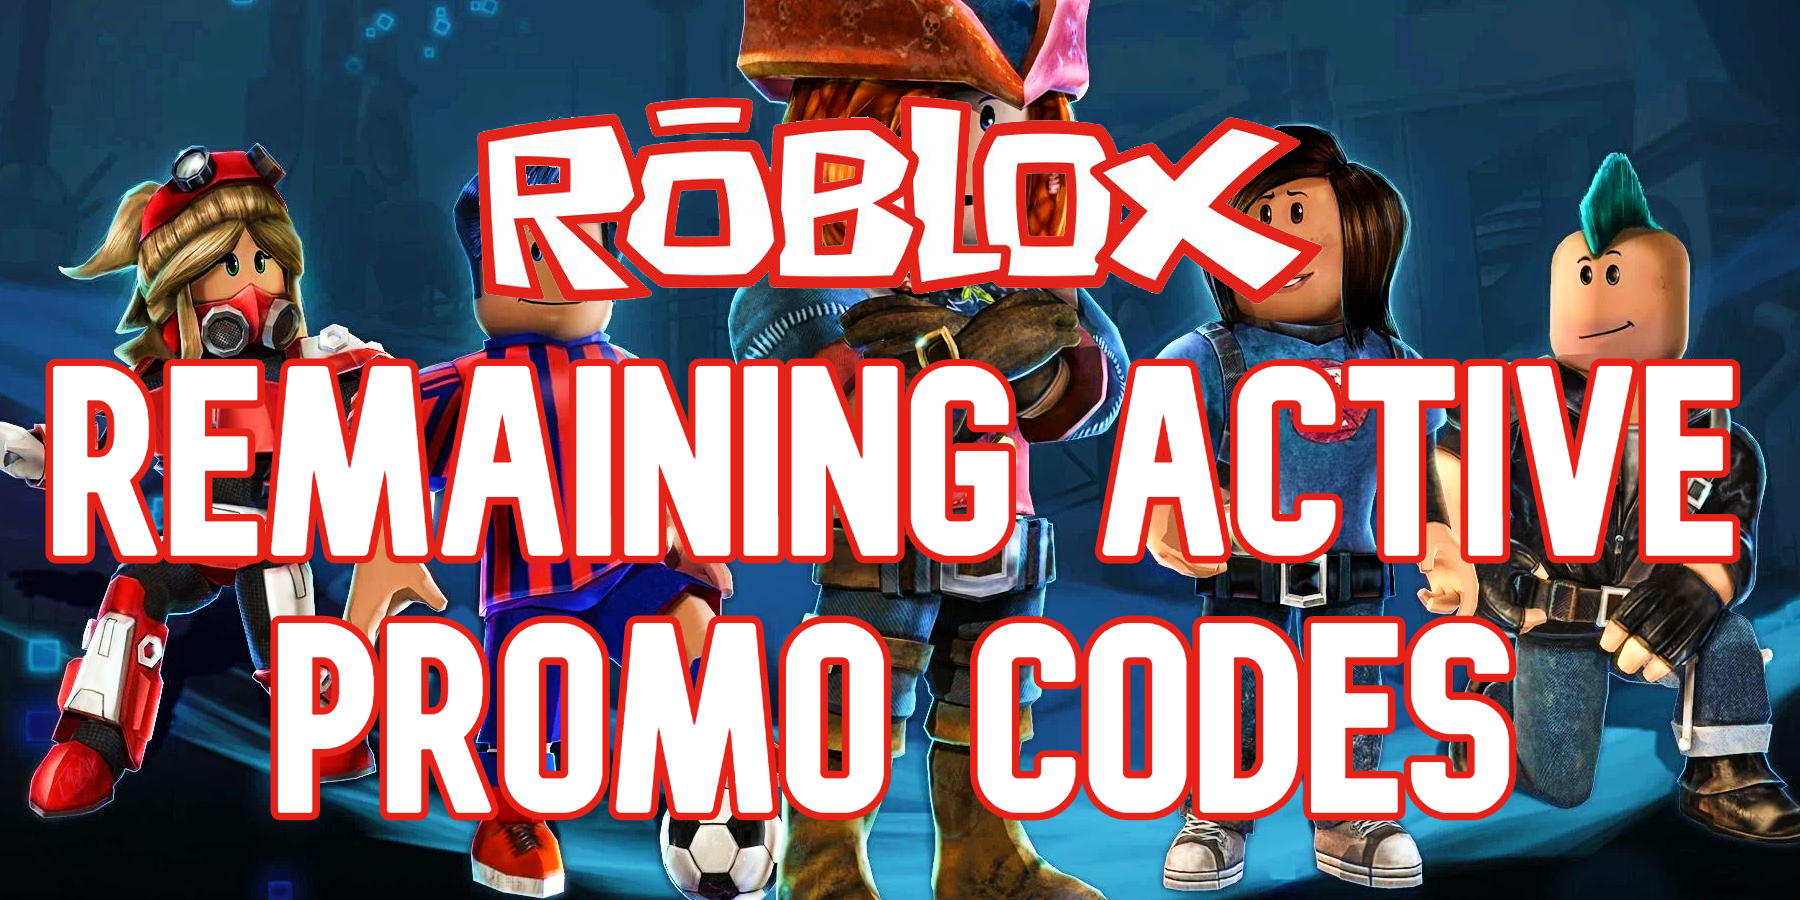 roblox-remaining-active-codes-2145756